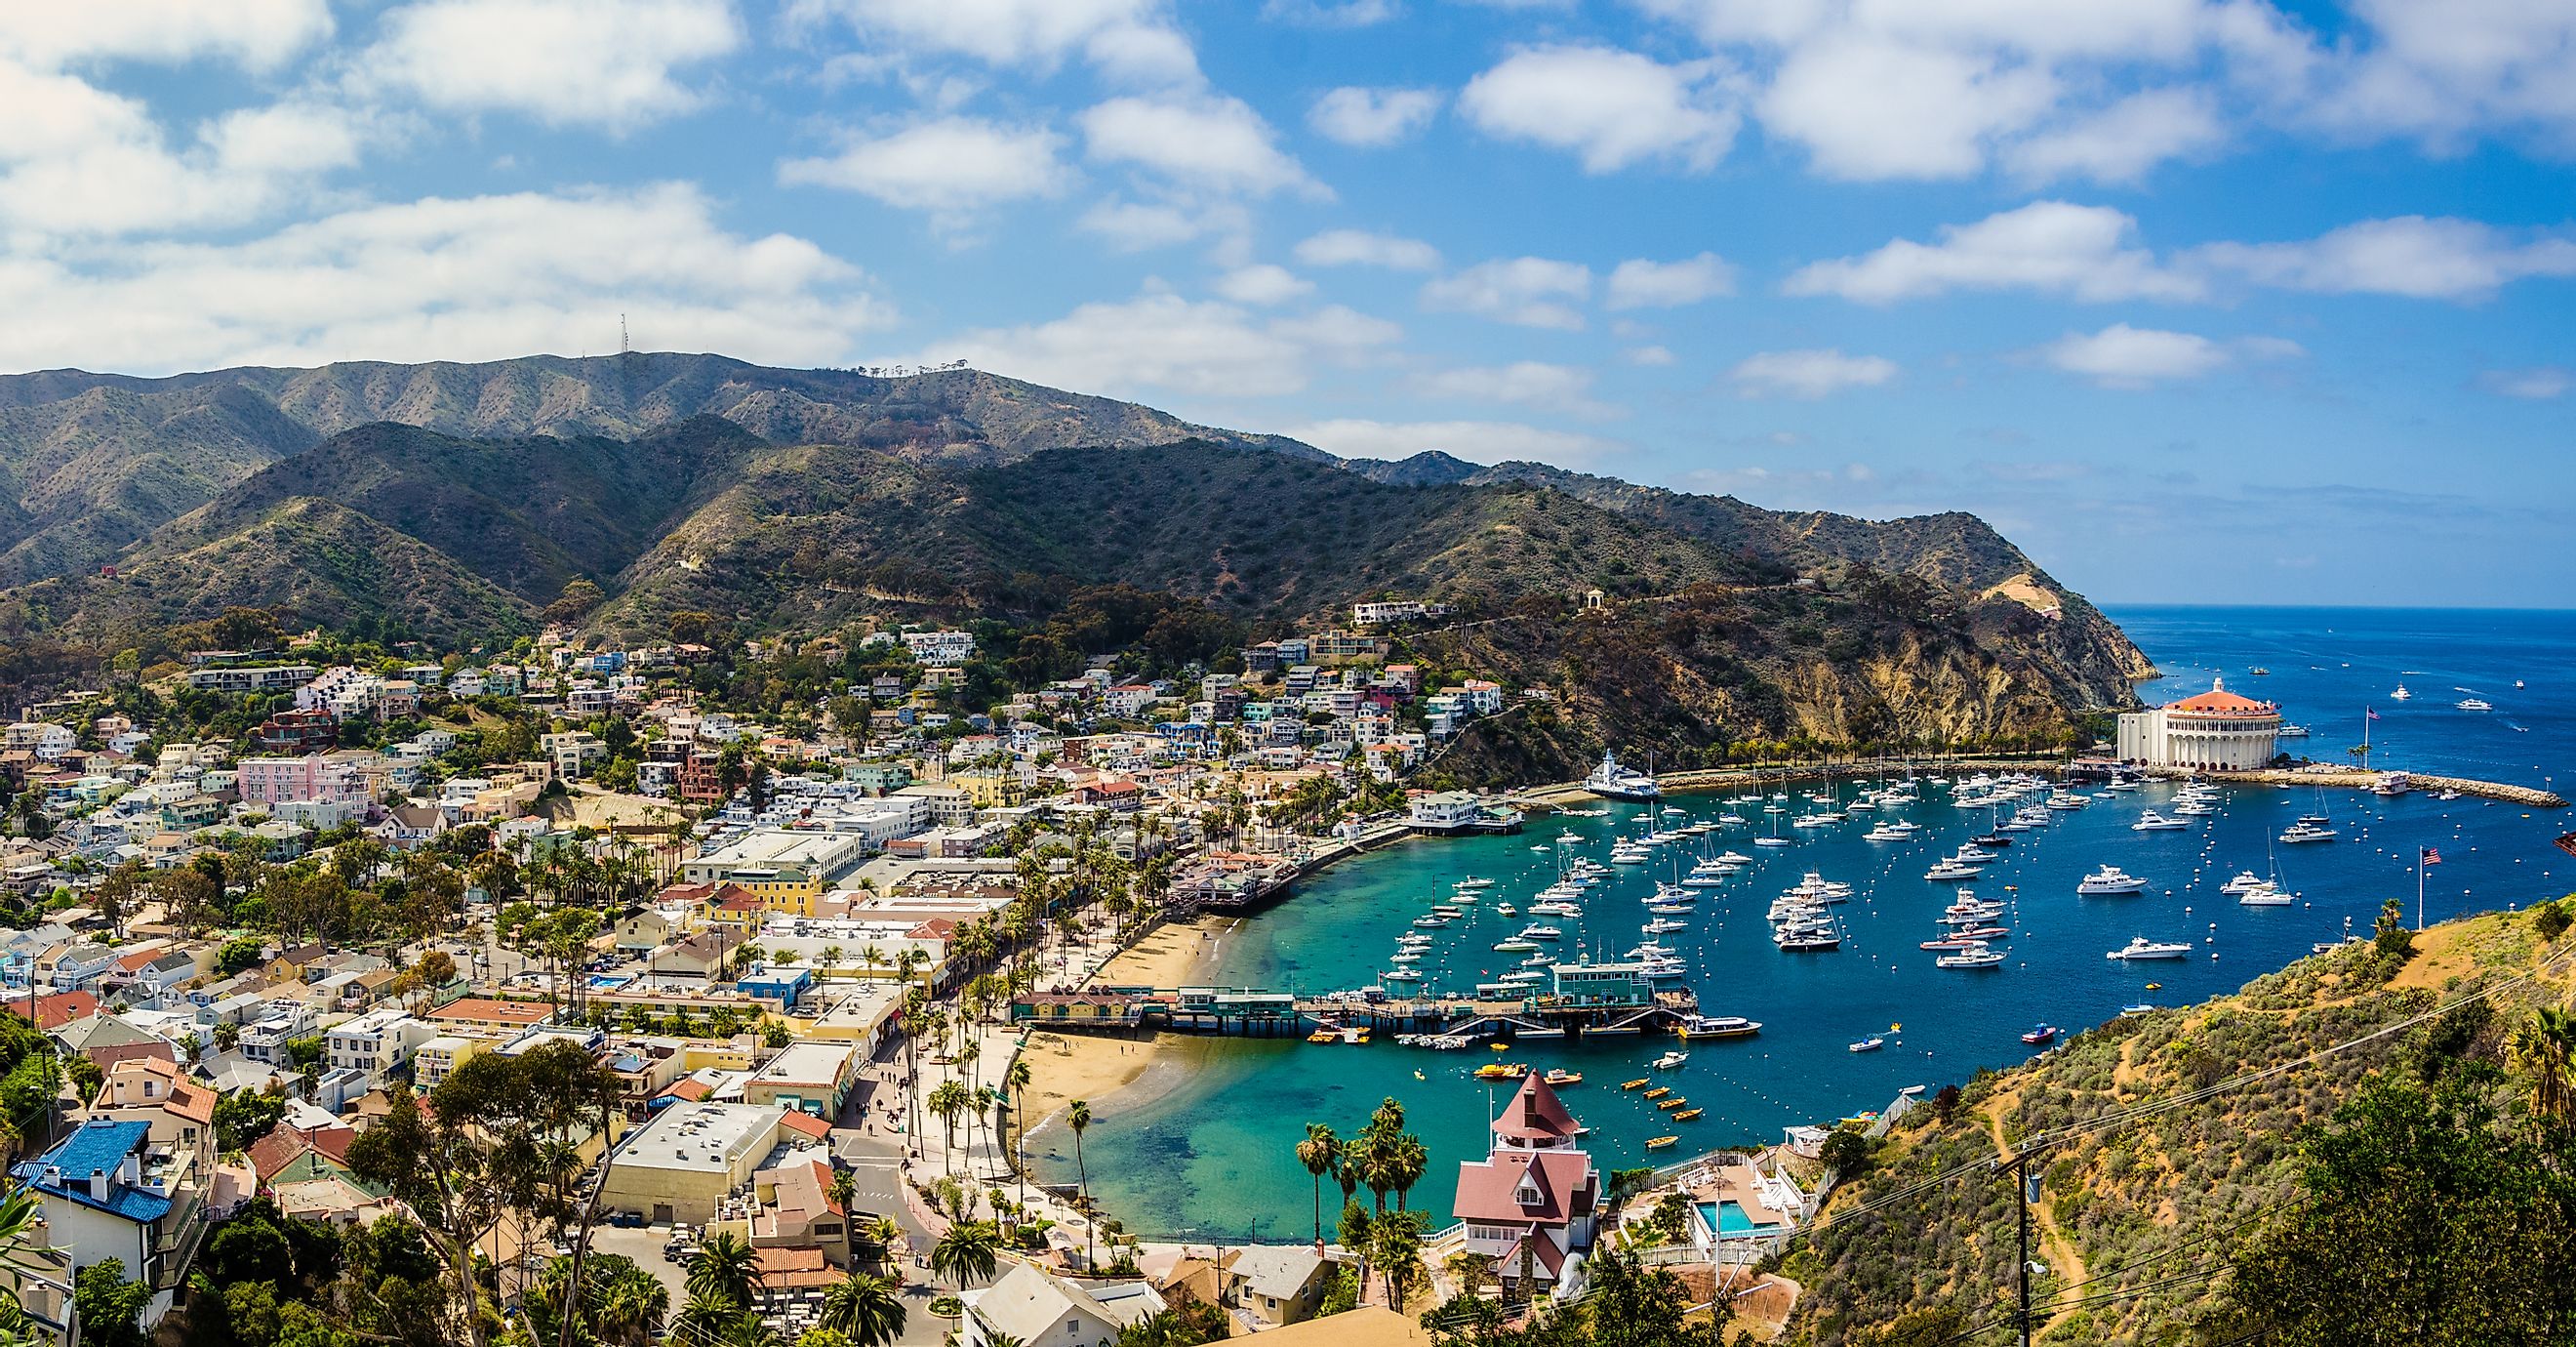 Ariel view of Avalon, a city on Santa Catalina Island, in the California Channel Islands.